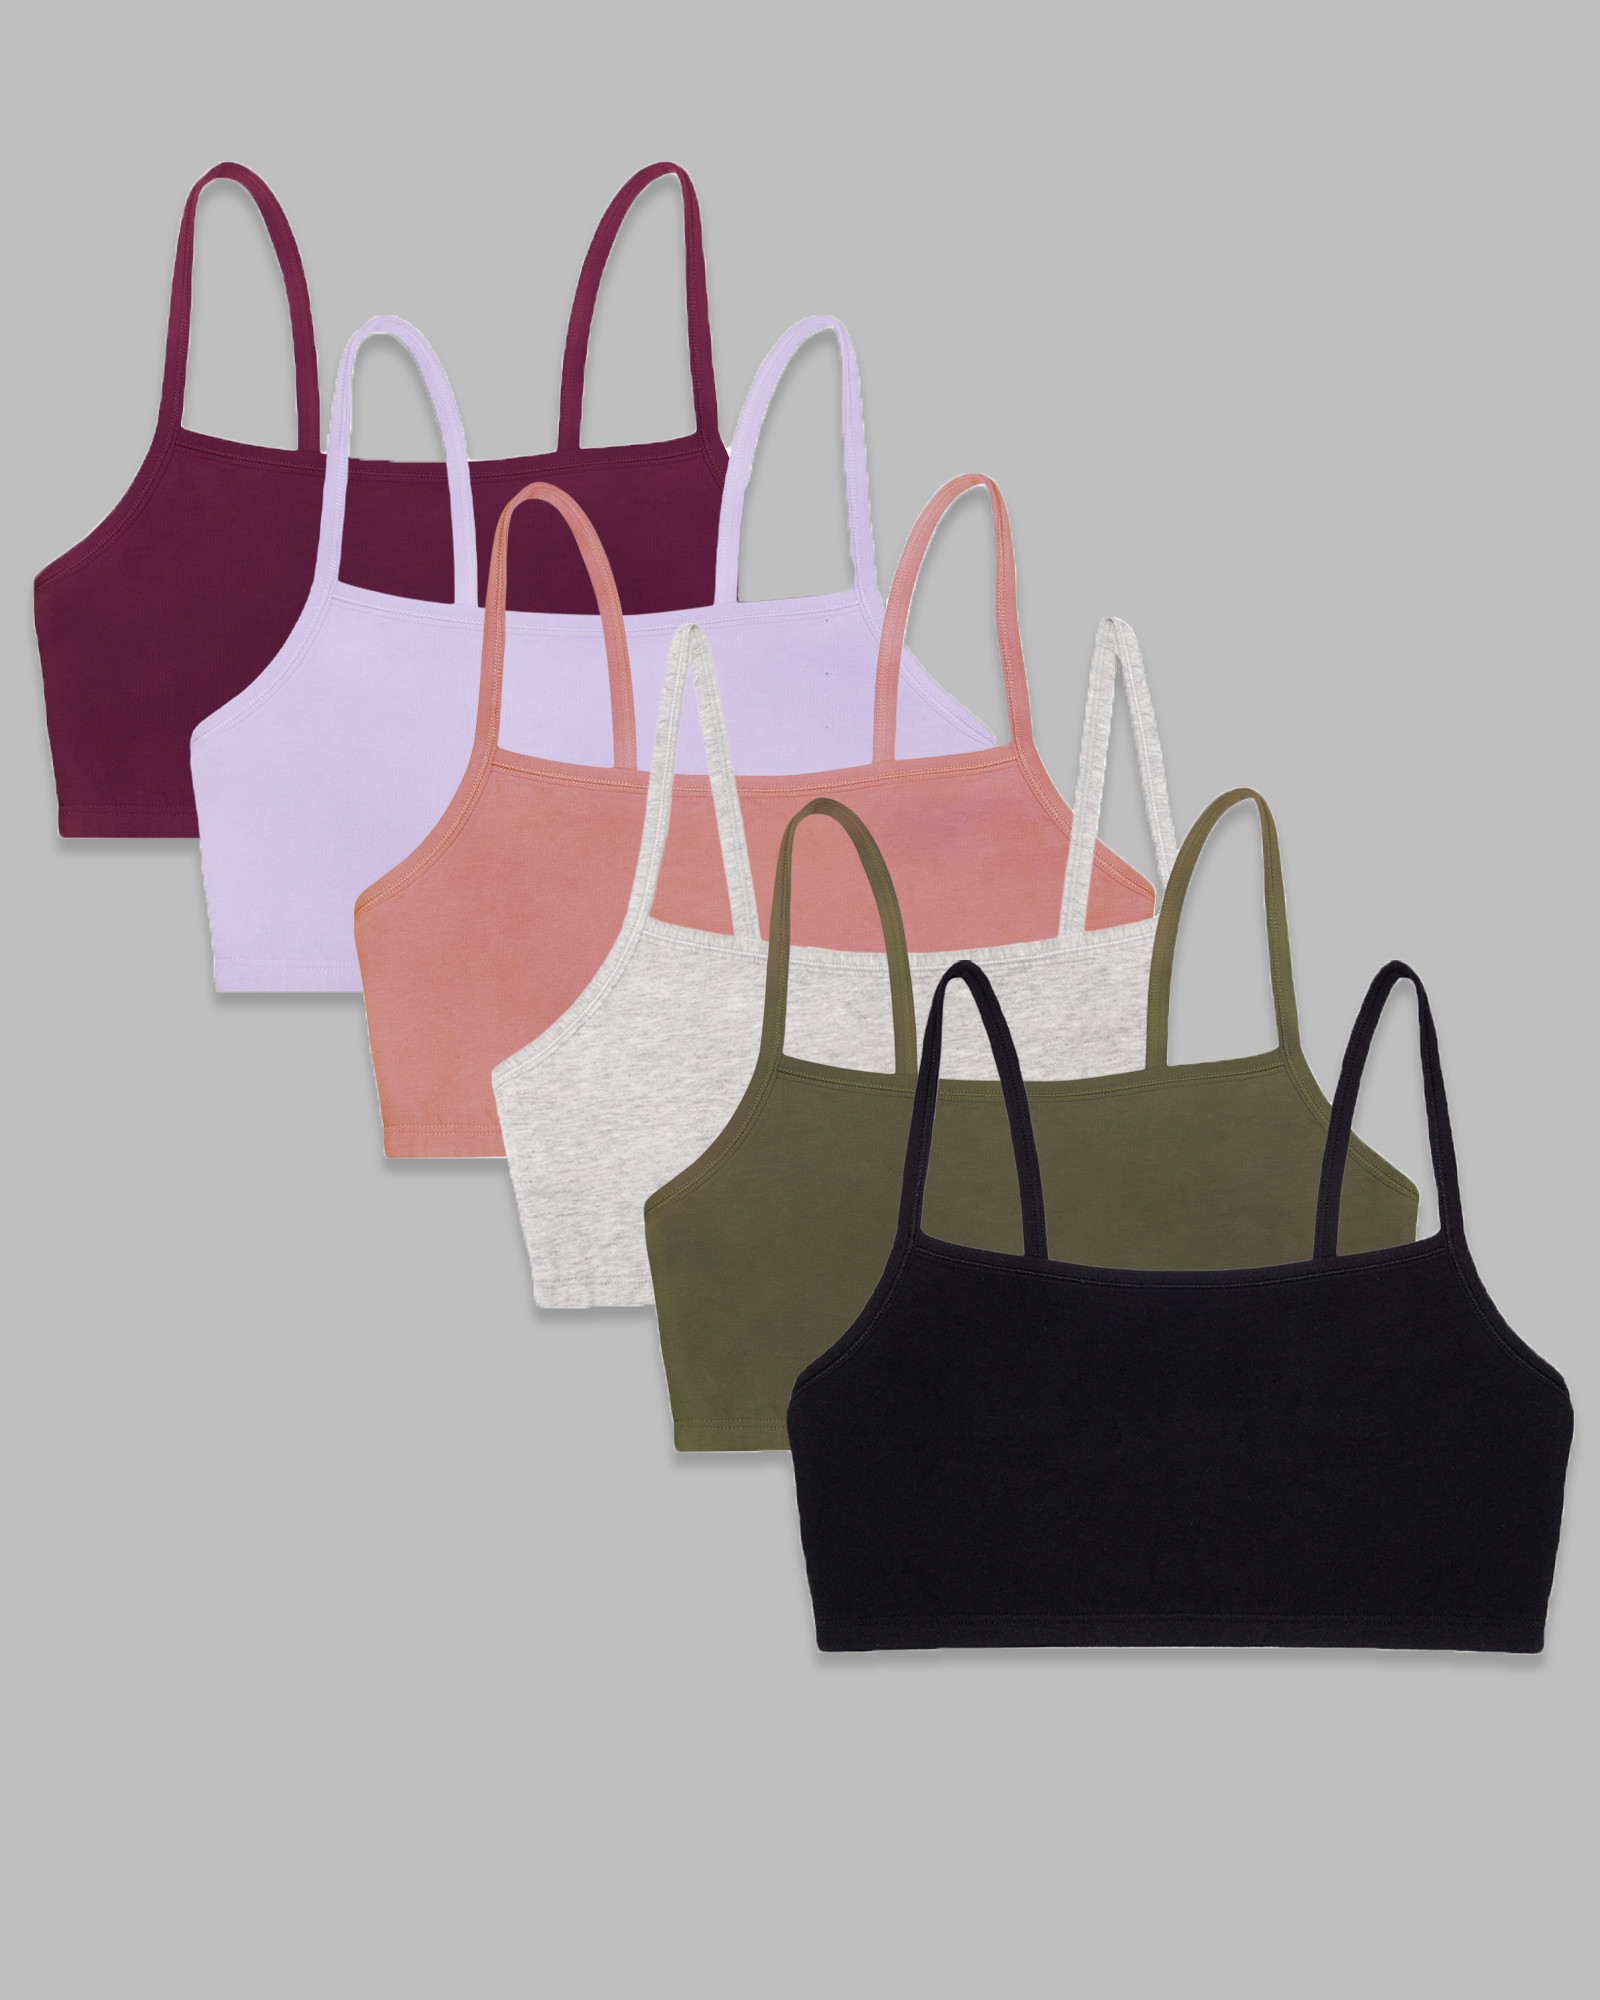 Fruit Of The Loom Sports Bras − Sale: at $6.56+